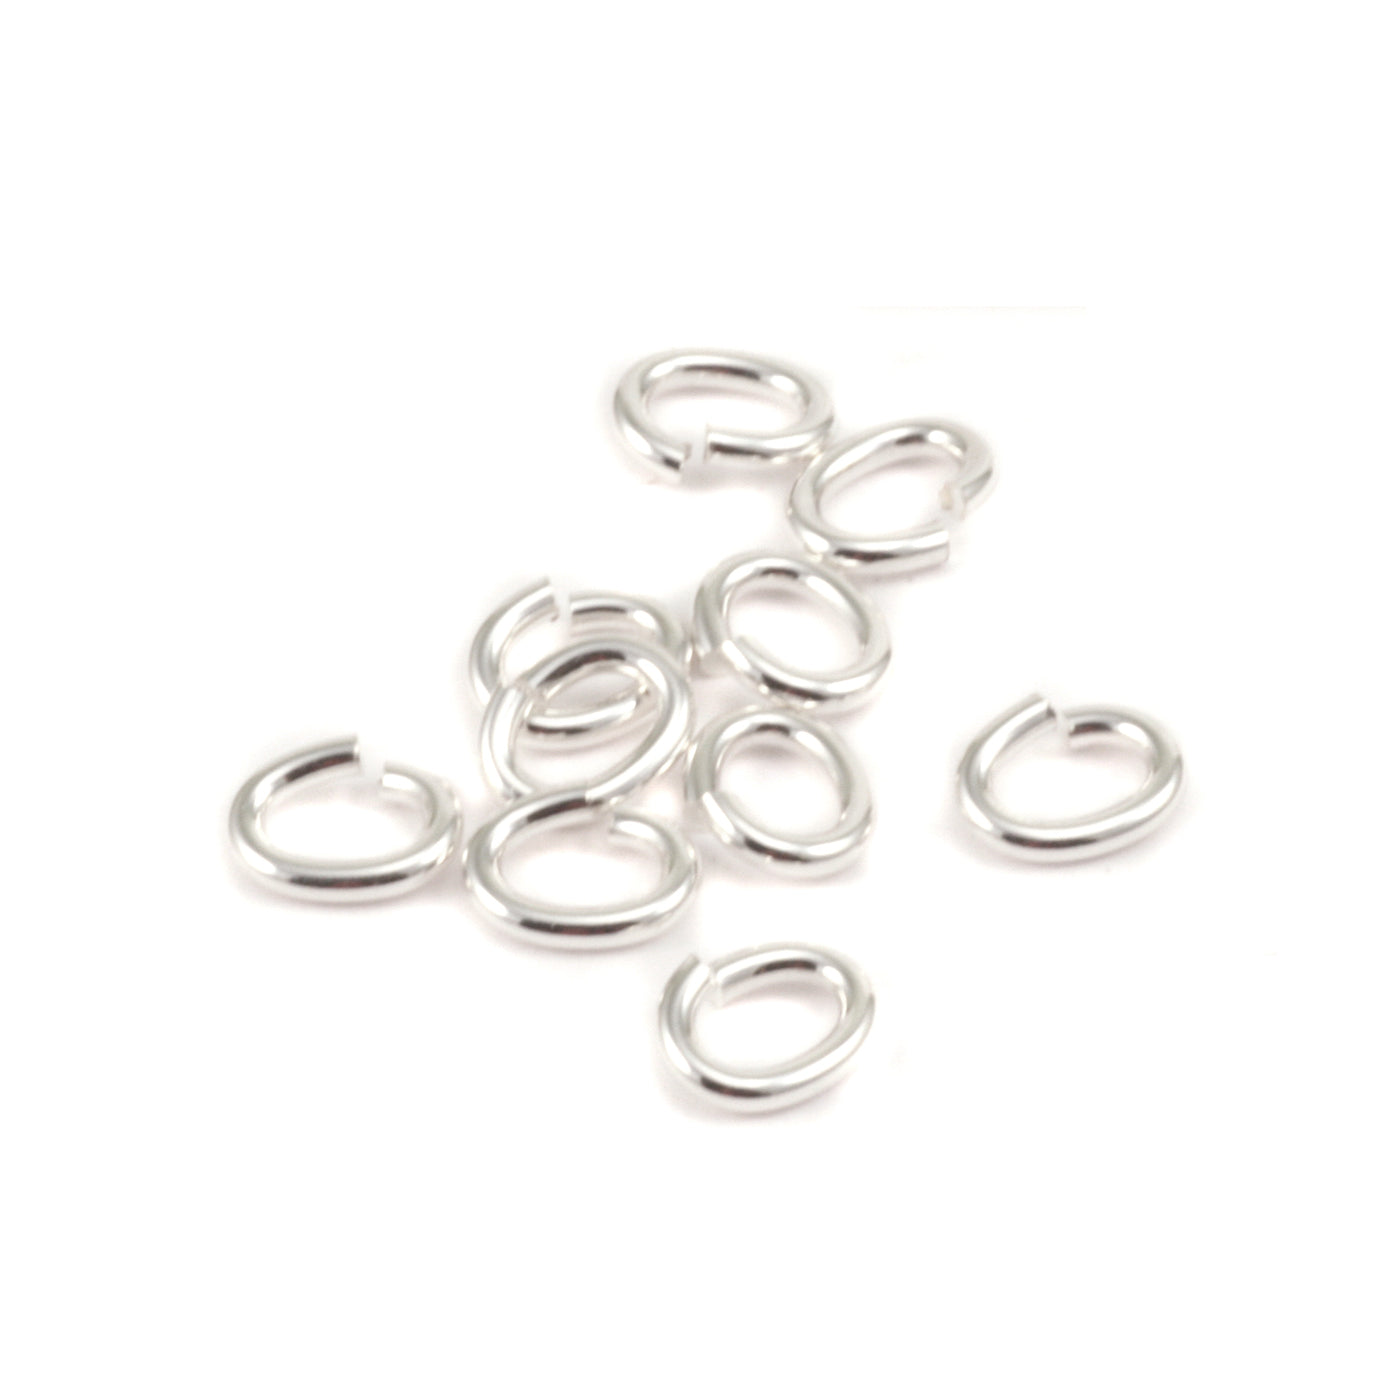 Sterling Silver 2.9mm x 4.1mm I.D. 18 Gauge Oval Jump Ring, Pack